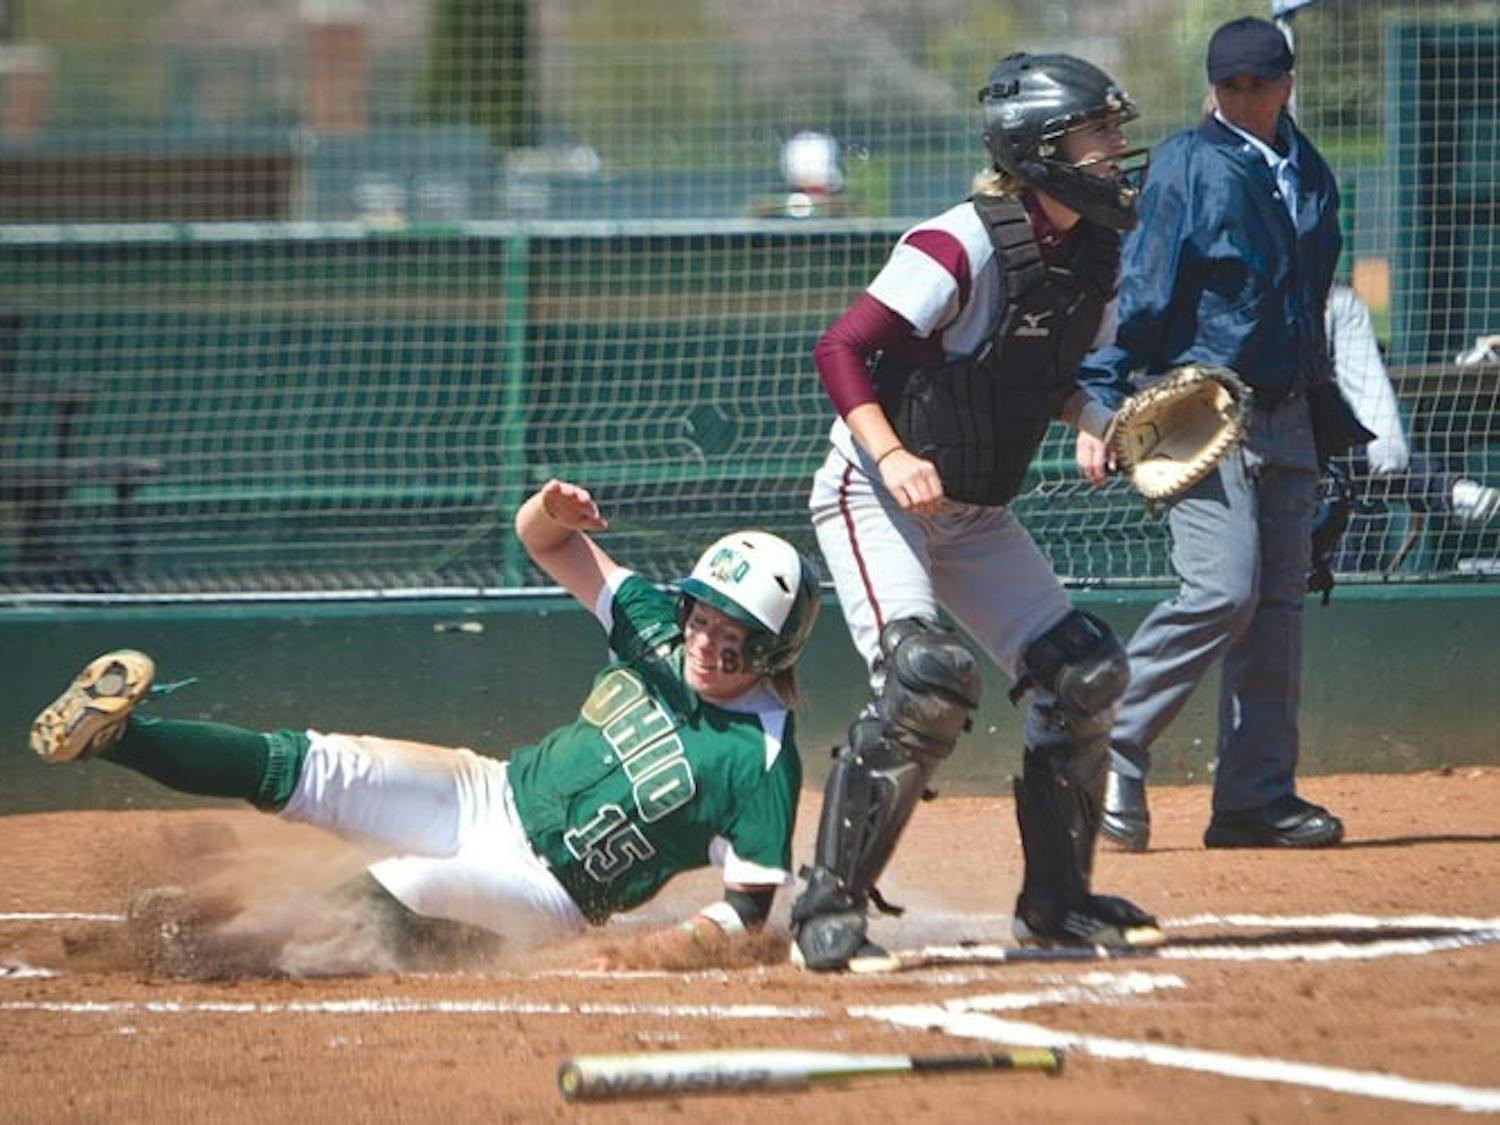 Softball: Bobcats mercy-ruled, lose to Marshall in both games of doubleheader  